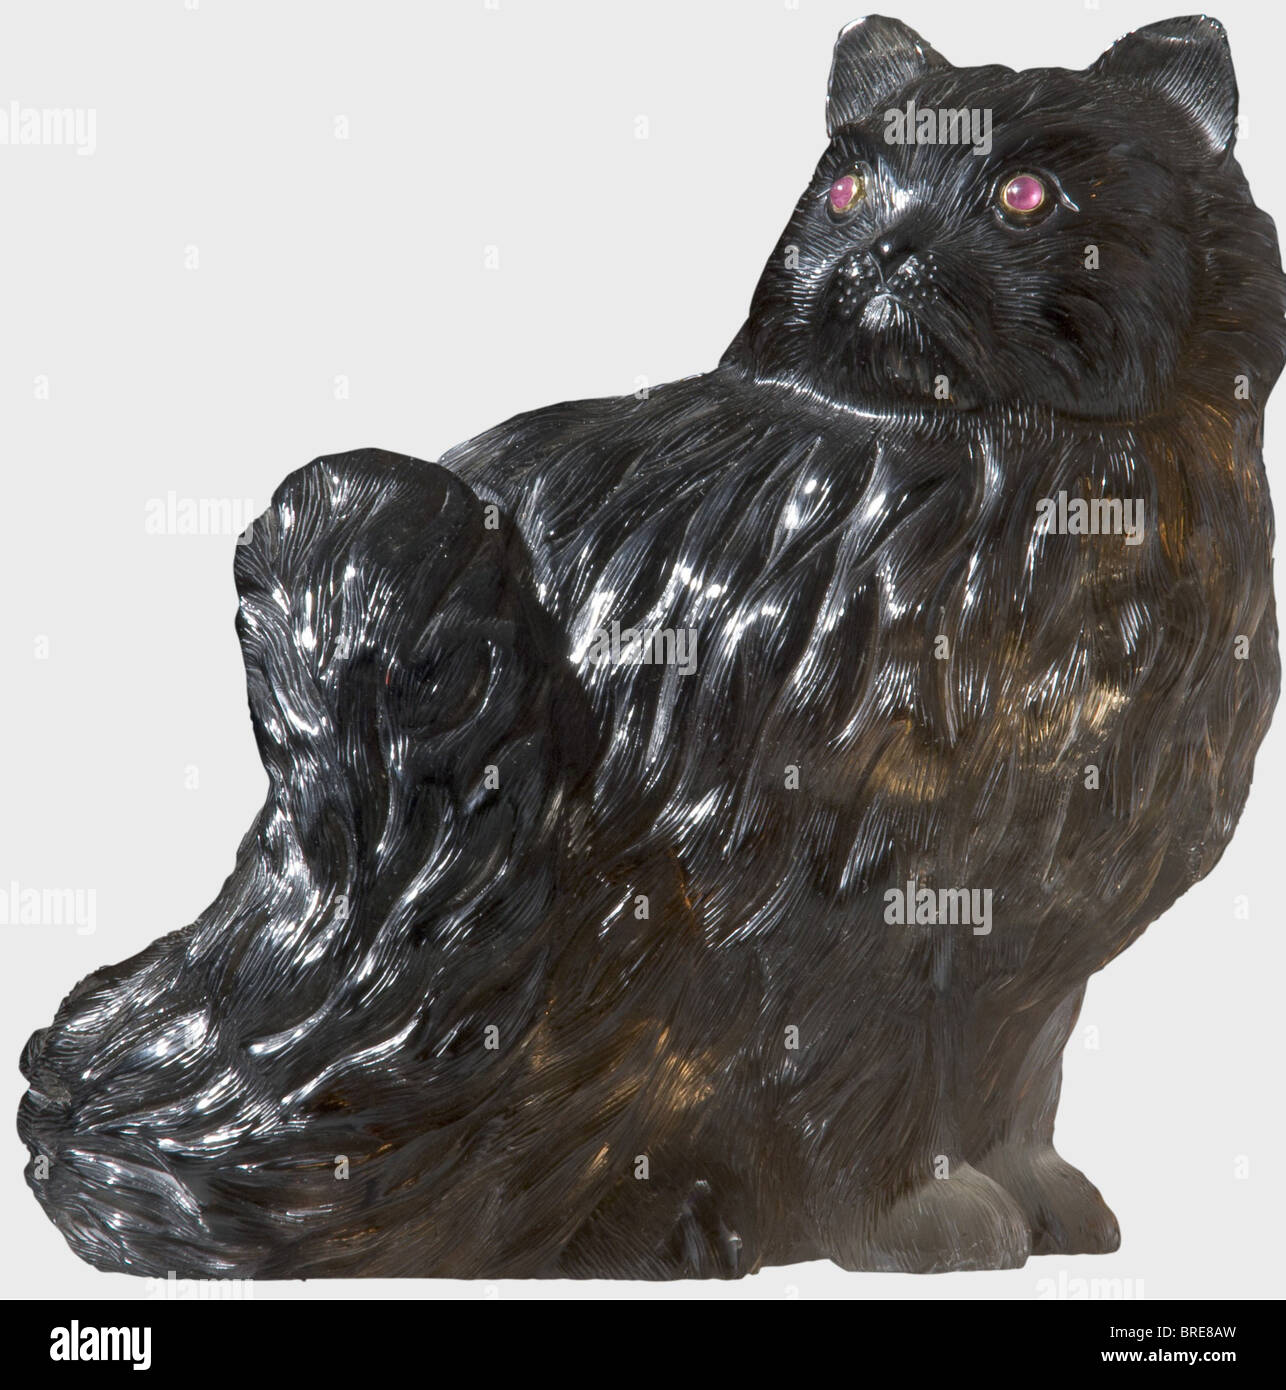 A figure of a Persian cat, attributed to Karl Fabergé, circa 1910 Made of smoky quartz, with elaborately and finely carved coat. Two ruby eyes set in gold. Height 16.6 cm. According to the consignor, this lot formerly belonged to a Russian expatriate living in England. historic, historical, 1910s, 20th century, sculpture, sculptures, statuette, figurine, figurines, statuettes, fine arts, art, object, objects, stills, clipping, clippings, cut out, cut-out, cut-outs, Stock Photo